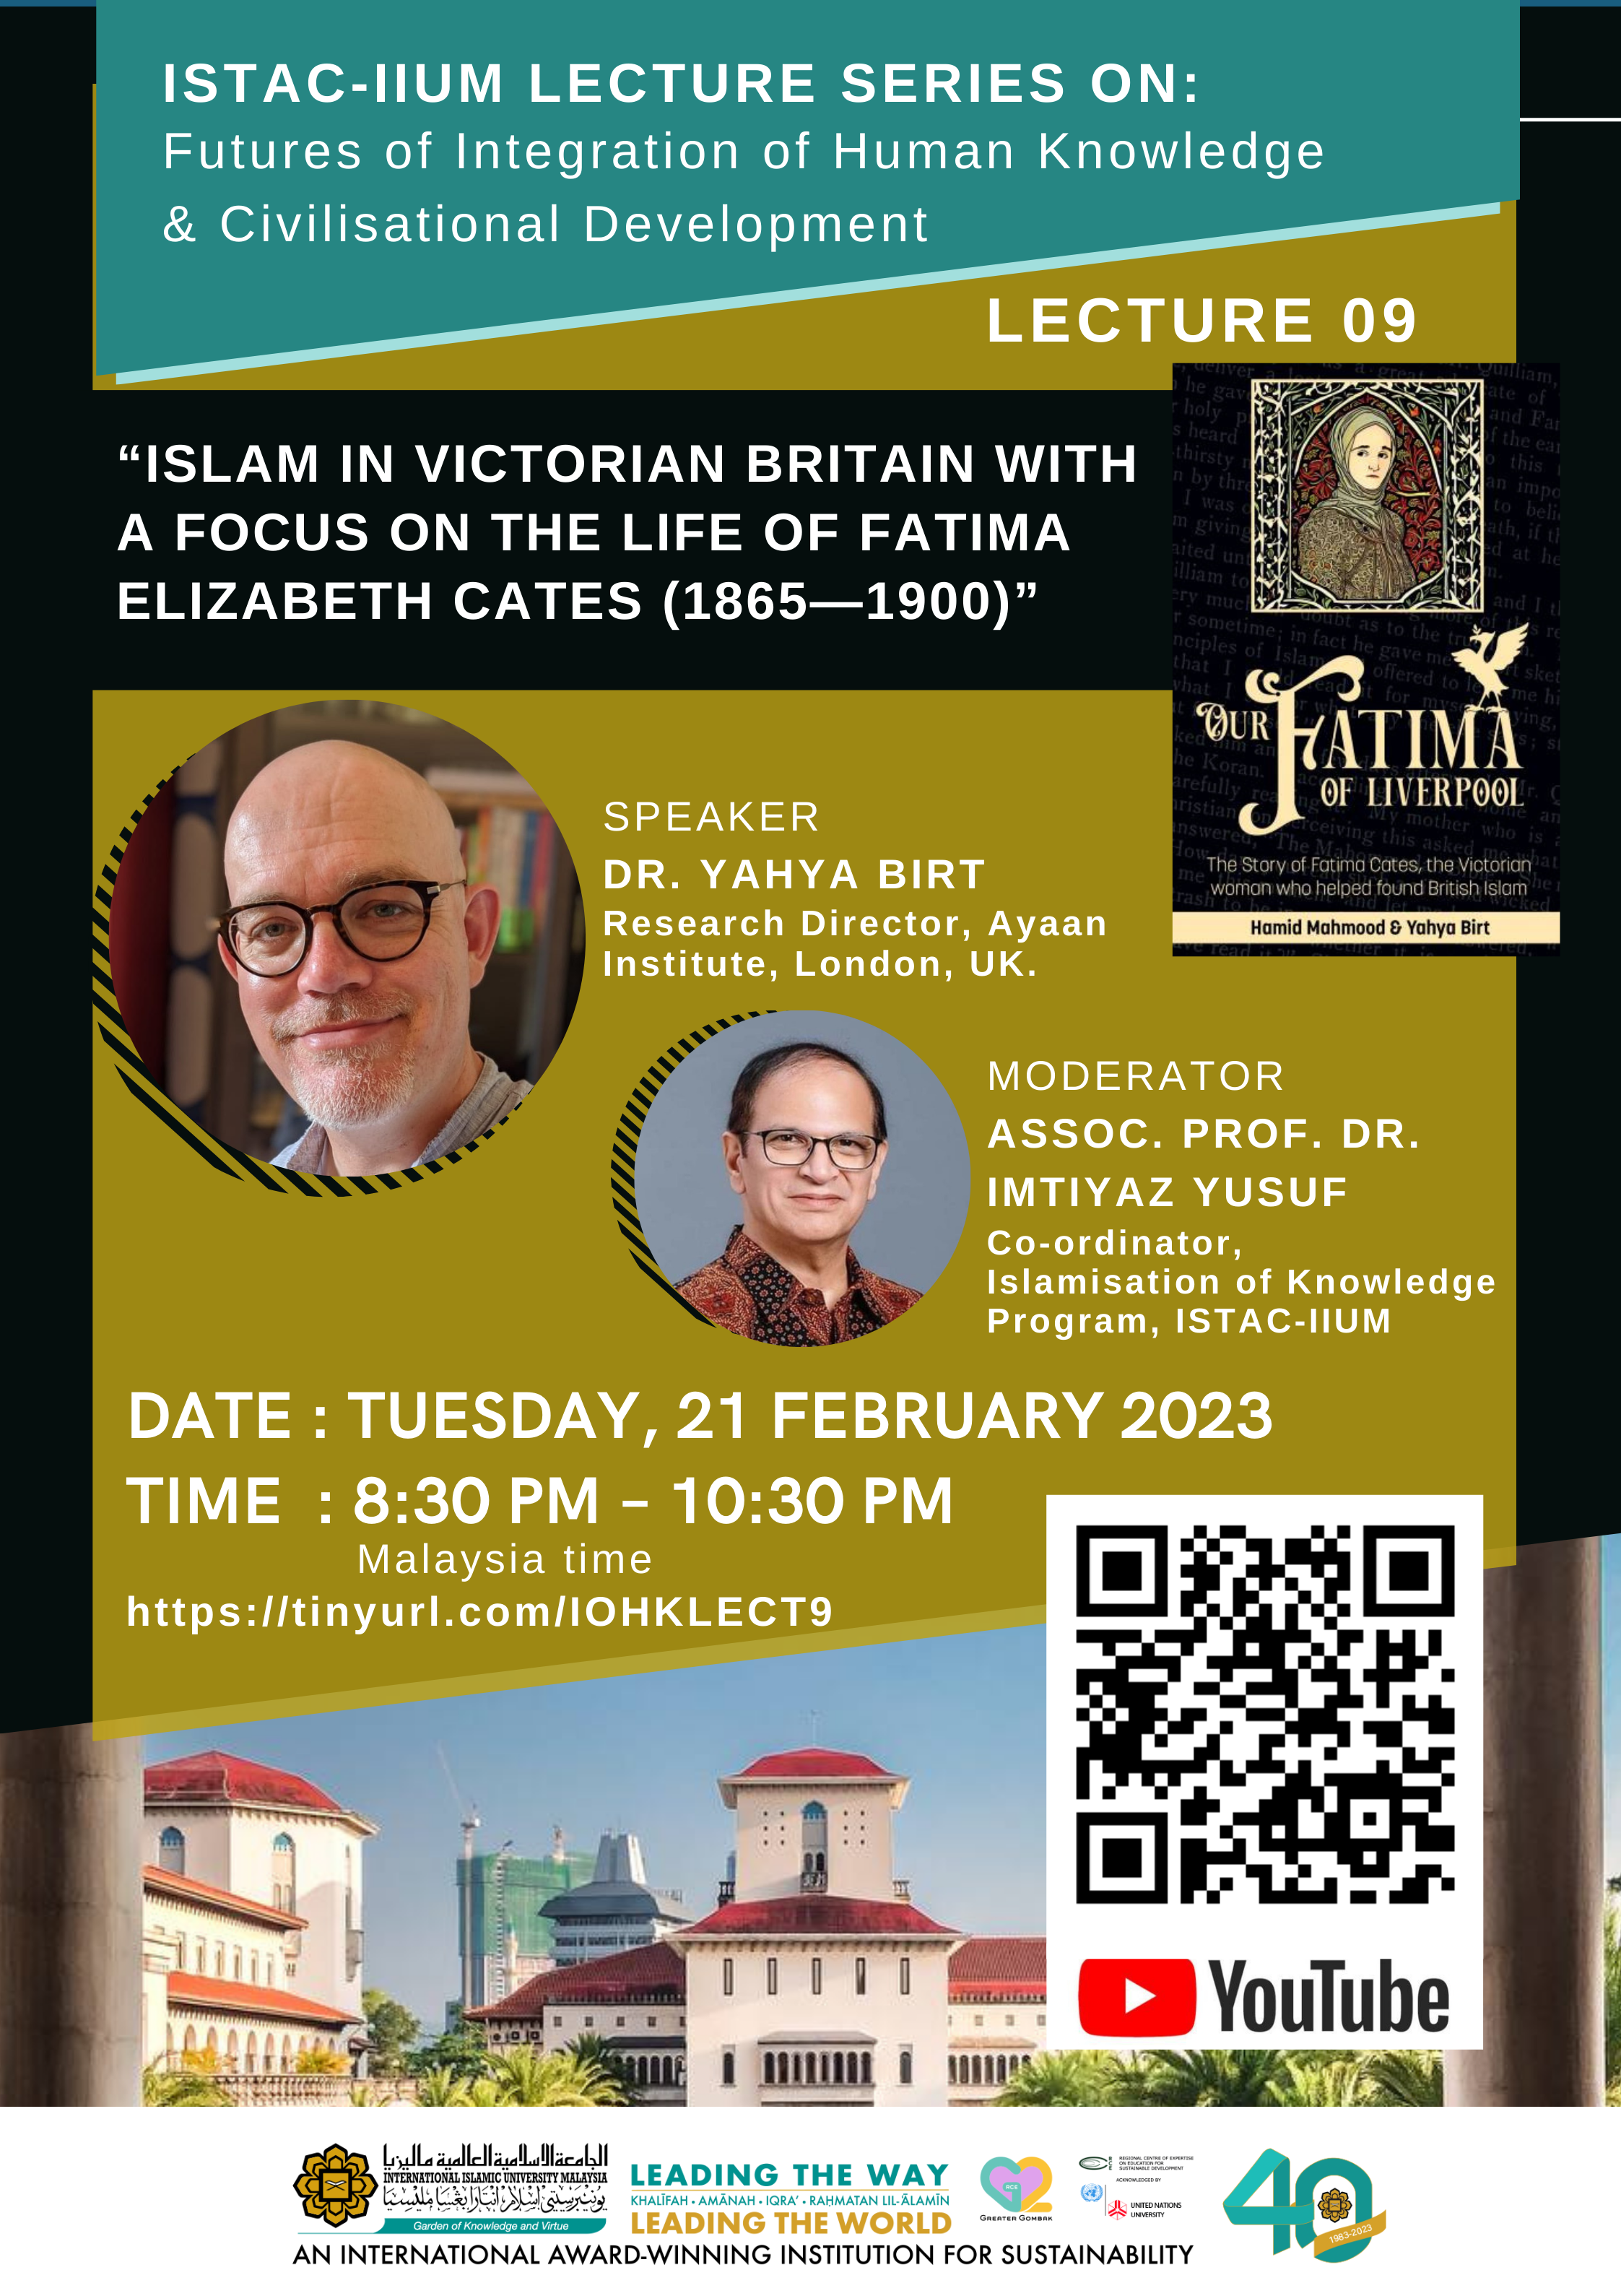 ISTAC-IIUM LECTURE SERIES ON FUTURES OF INTEGRATION OF HUMAN KNOWLEDGE & CIVILISATIONAL DEVELOPMENT_LECTURE 9